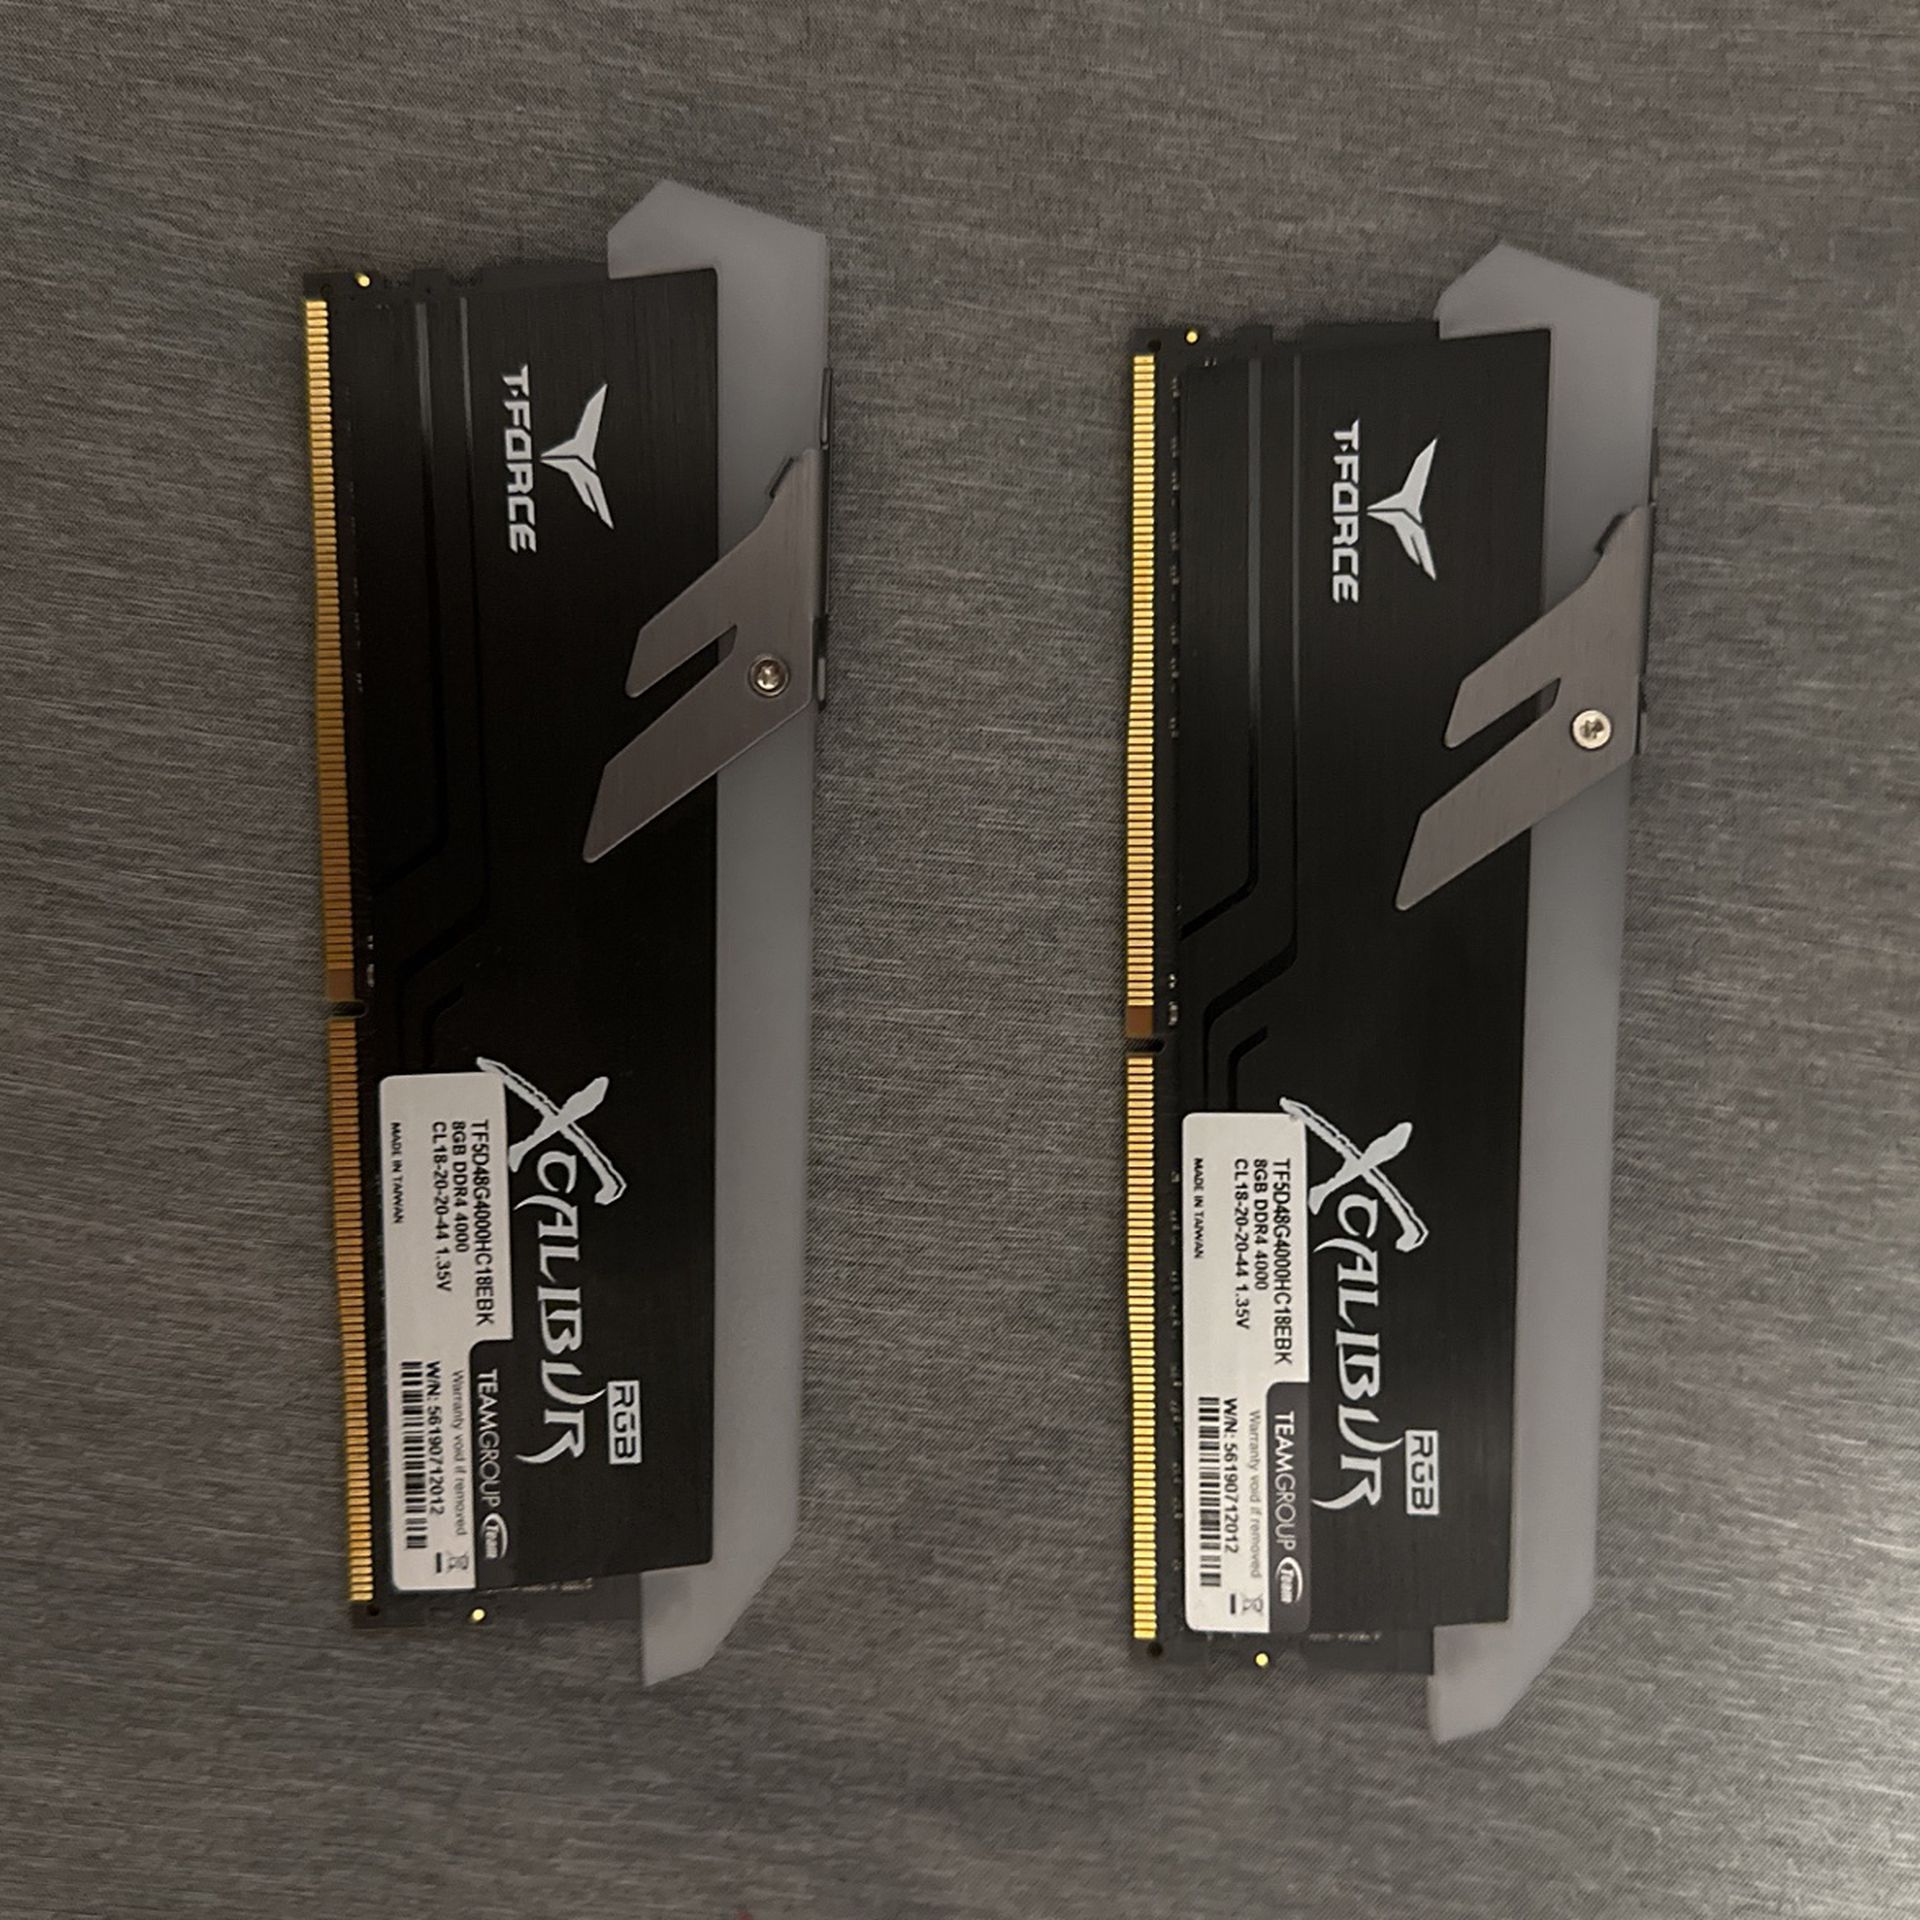 DDR4 Teamgroup T-force X caliber RGB 16GB (2x16) 4000 MHz 